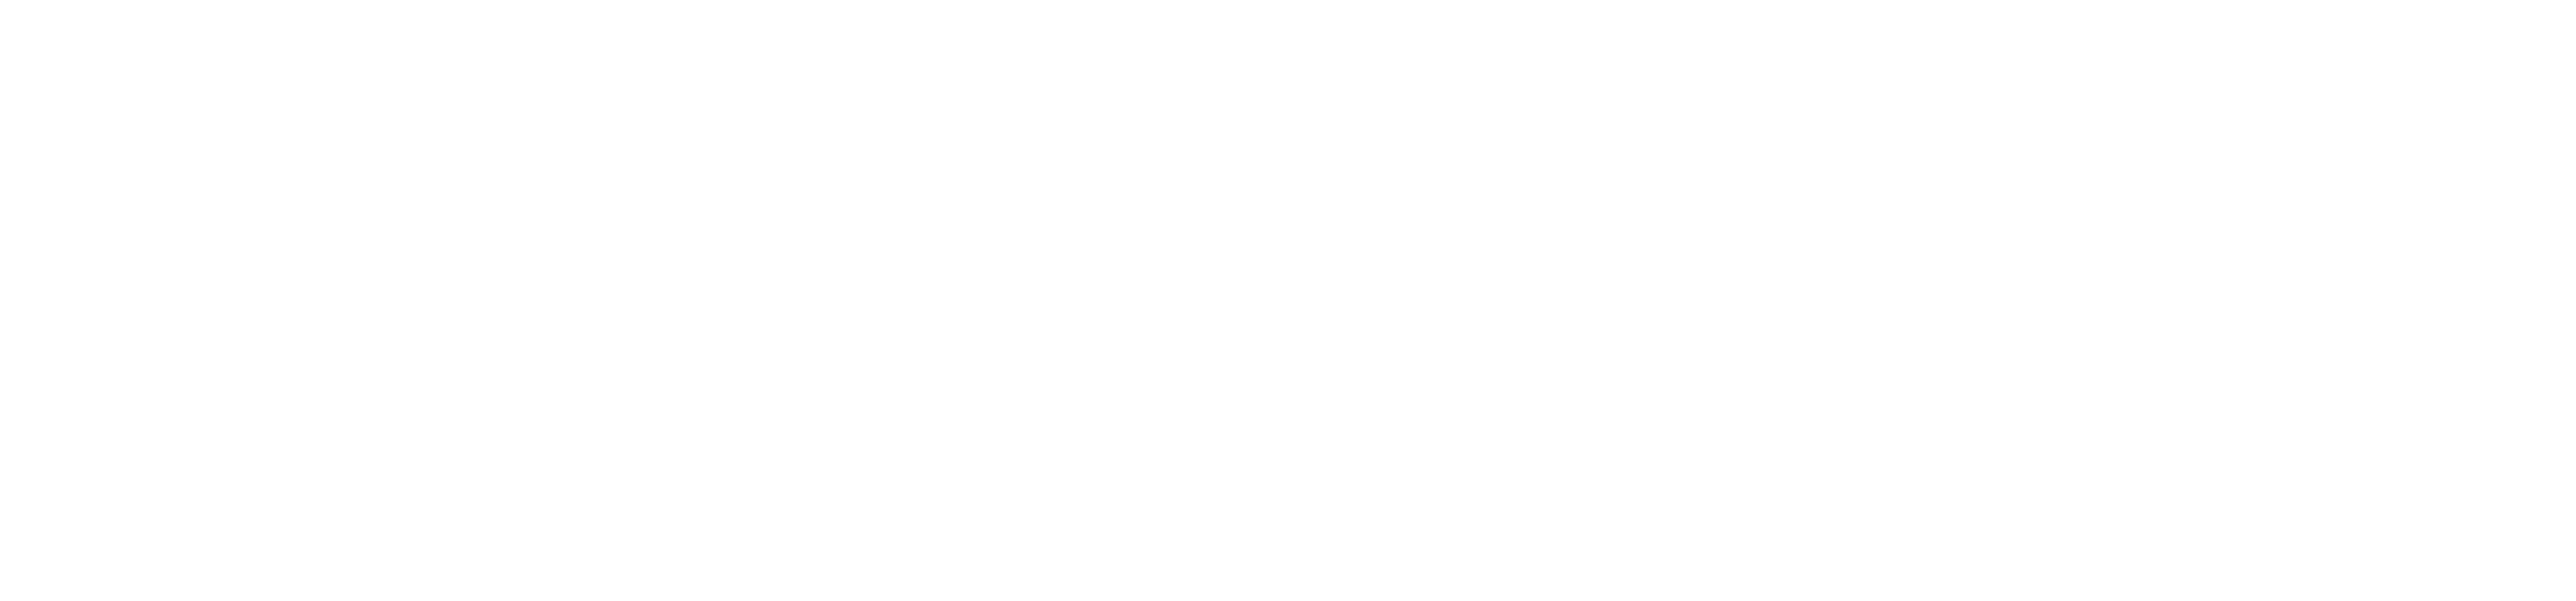 Novodes Embedded Software Testing and Automation